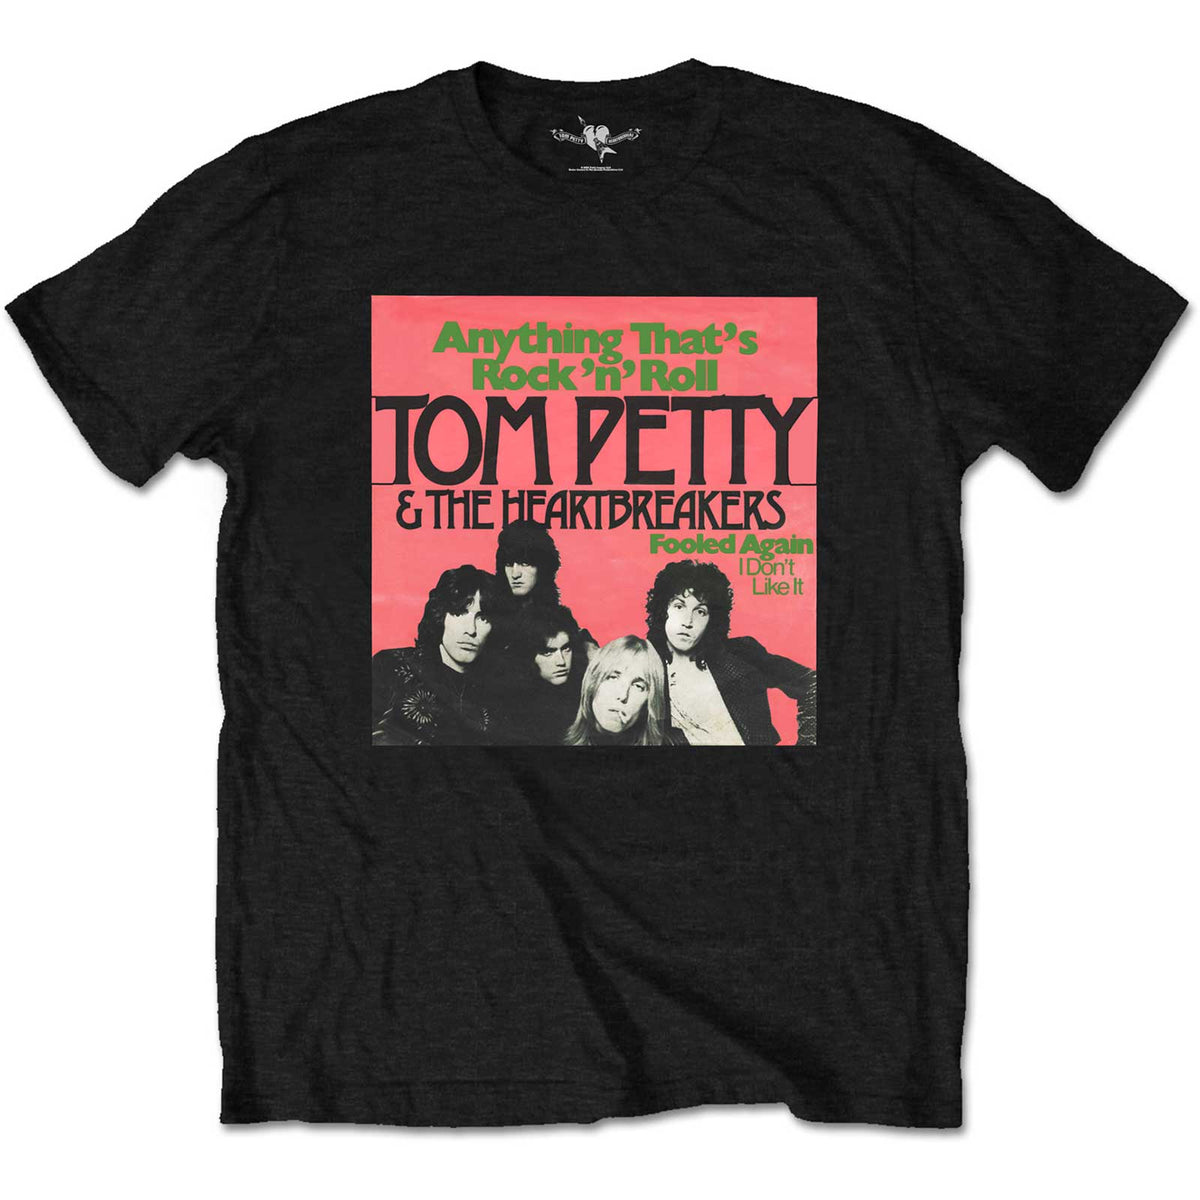 Tom Petty & the Heartbreakers Unisex T-Shirt - Anything - Official Product